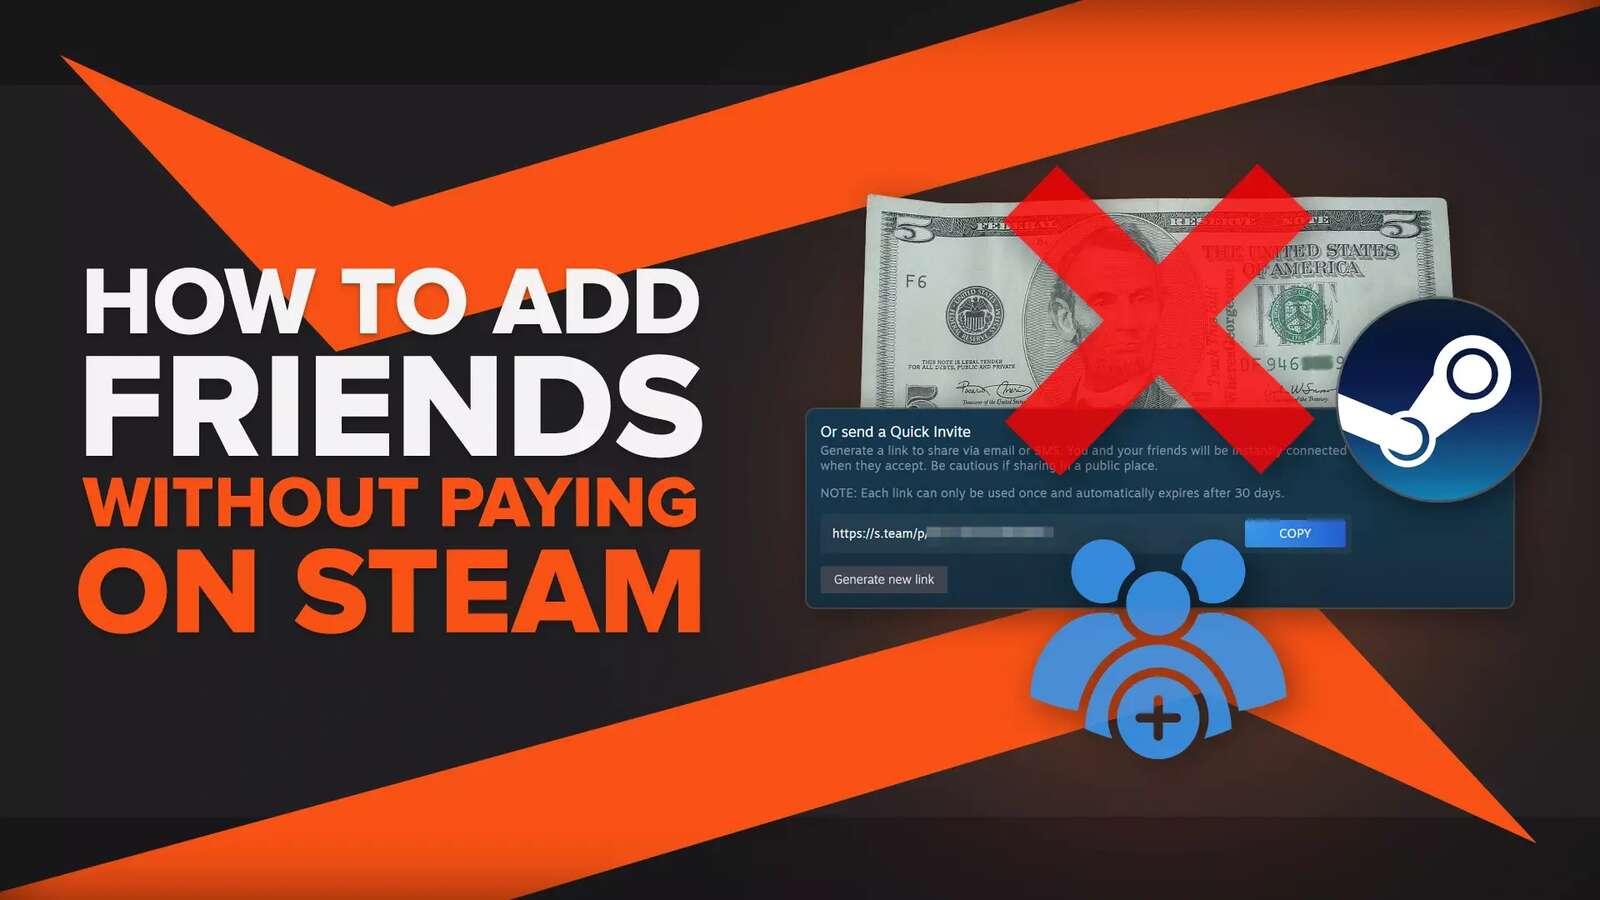 Here's How to Easily Add Friends Without Paying on Steam